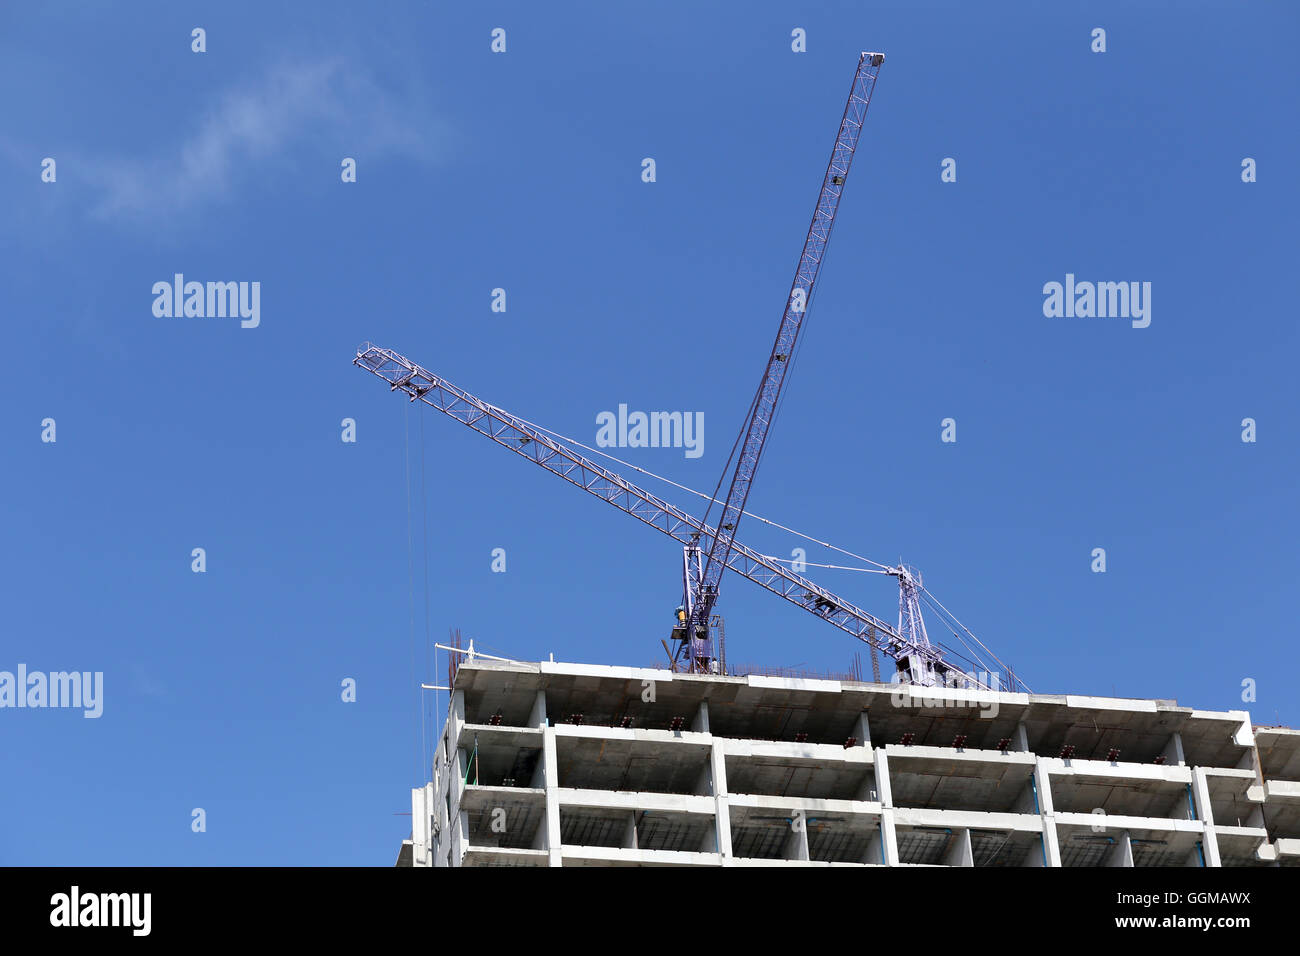 Crane working on a building under construction in day time and blue sky background. Stock Photo